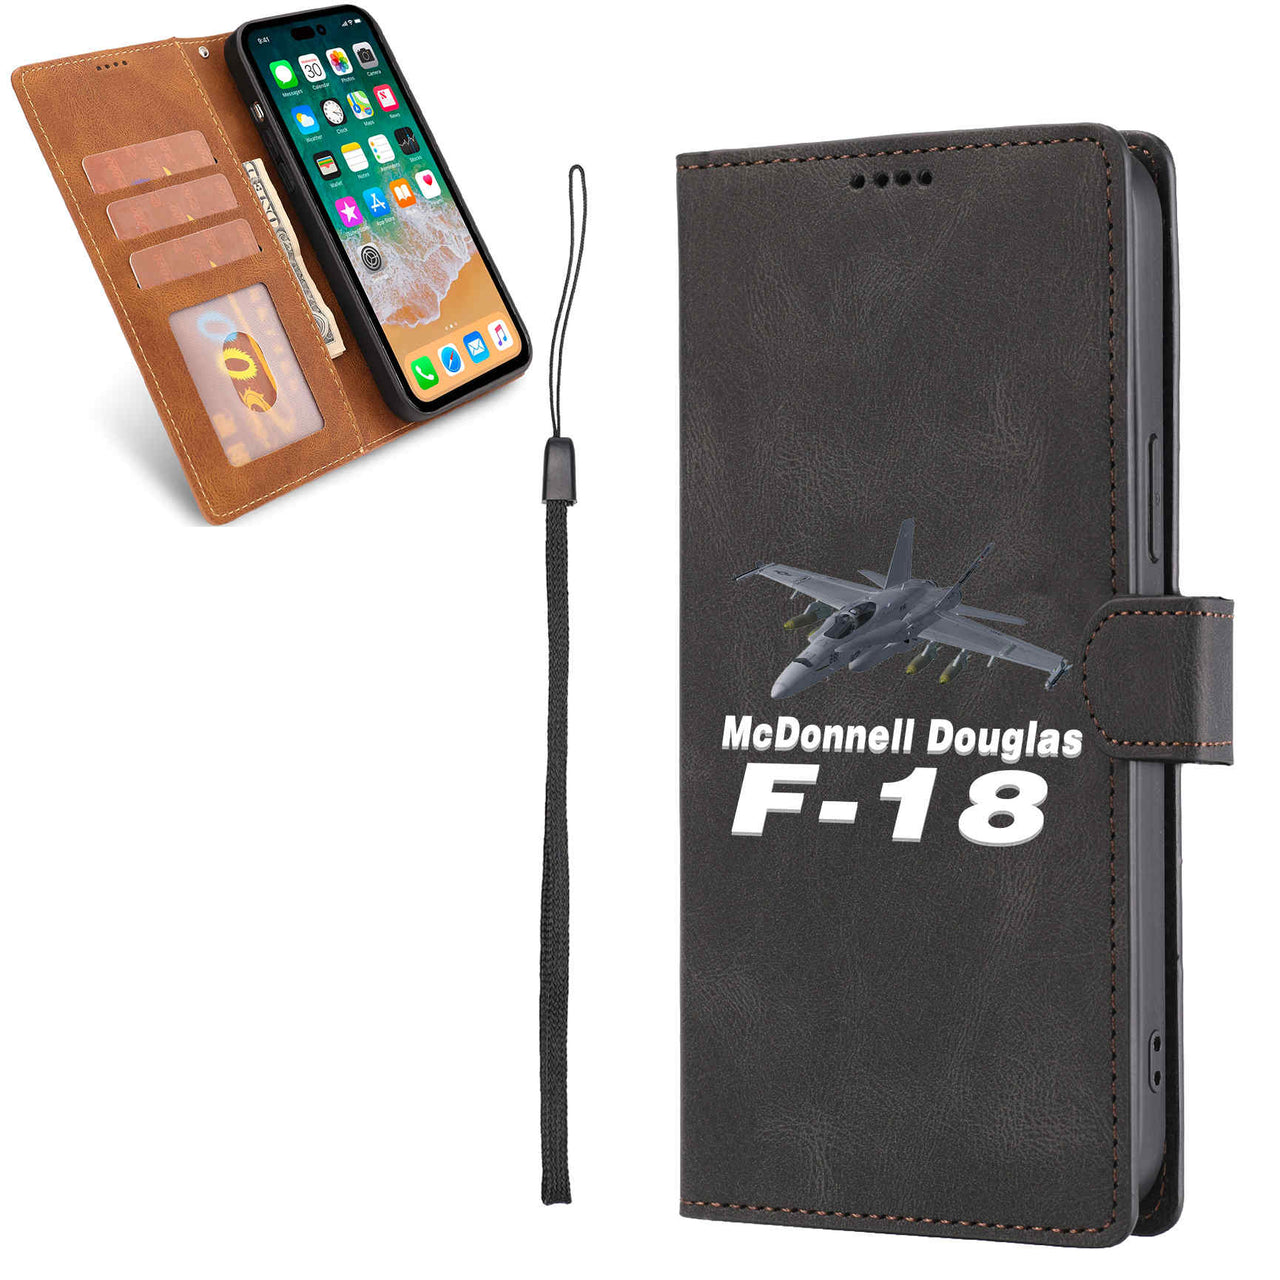 The McDonnell Douglas F18 Leather Samsung A Cases